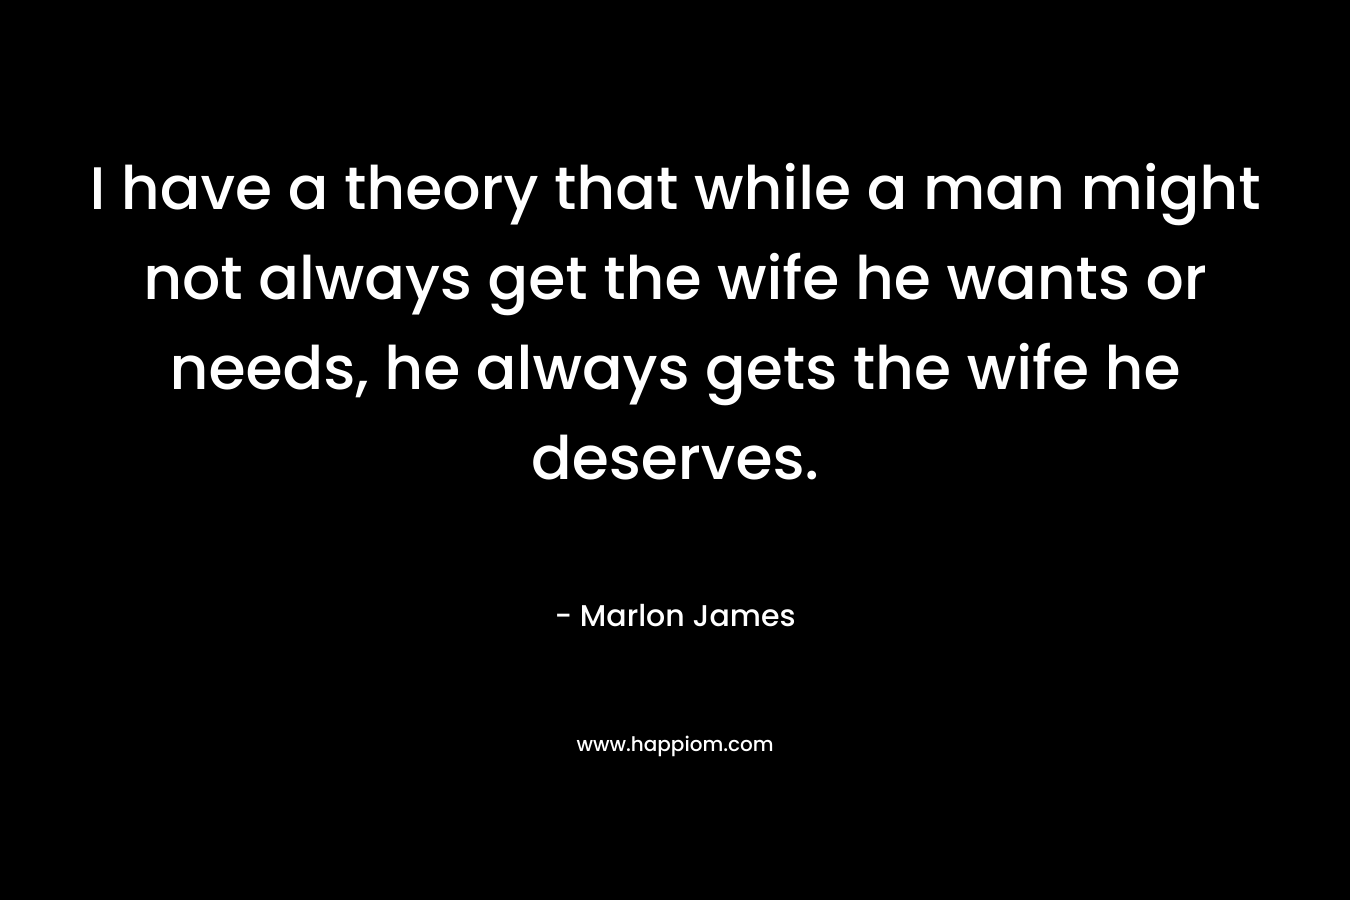 I have a theory that while a man might not always get the wife he wants or needs, he always gets the wife he deserves. – Marlon James